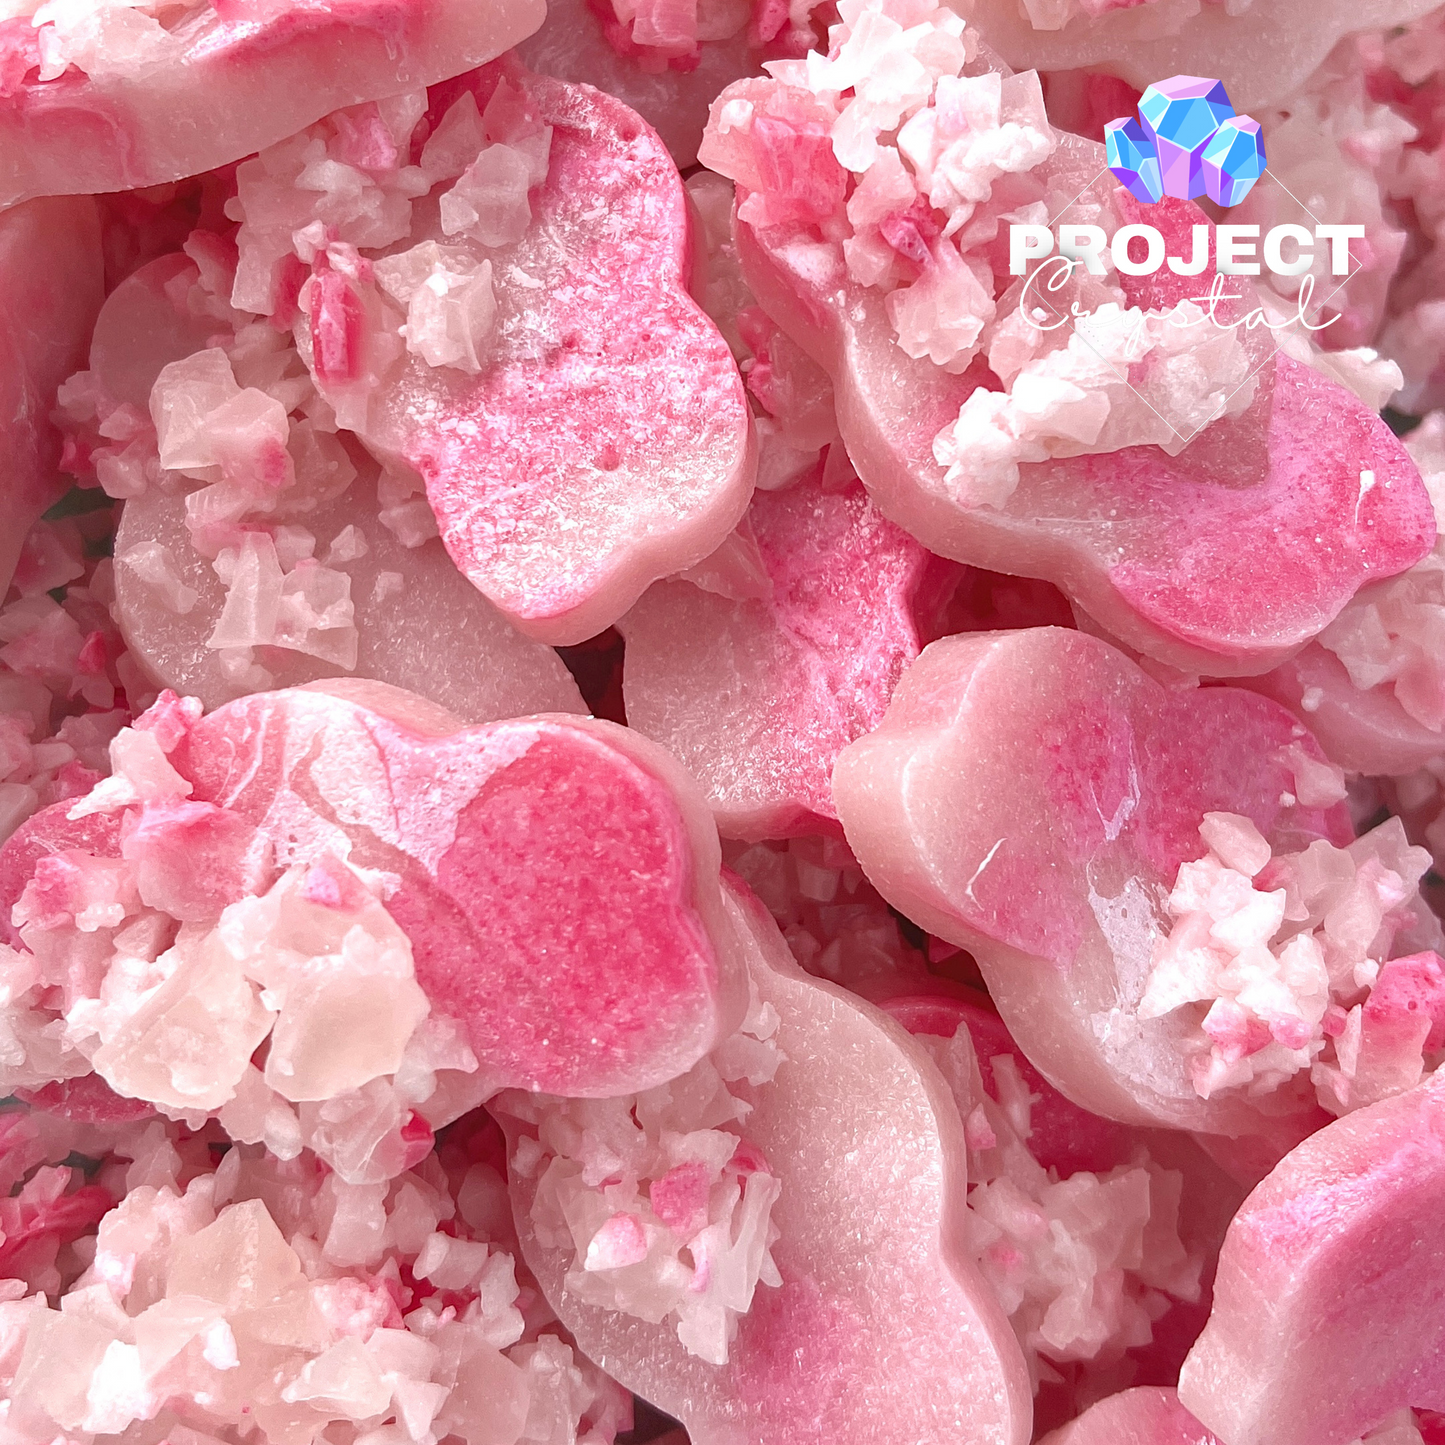 A selection of toasted marshmallow edible crystals, pretty shades of pink in fluffy cloud shapes 